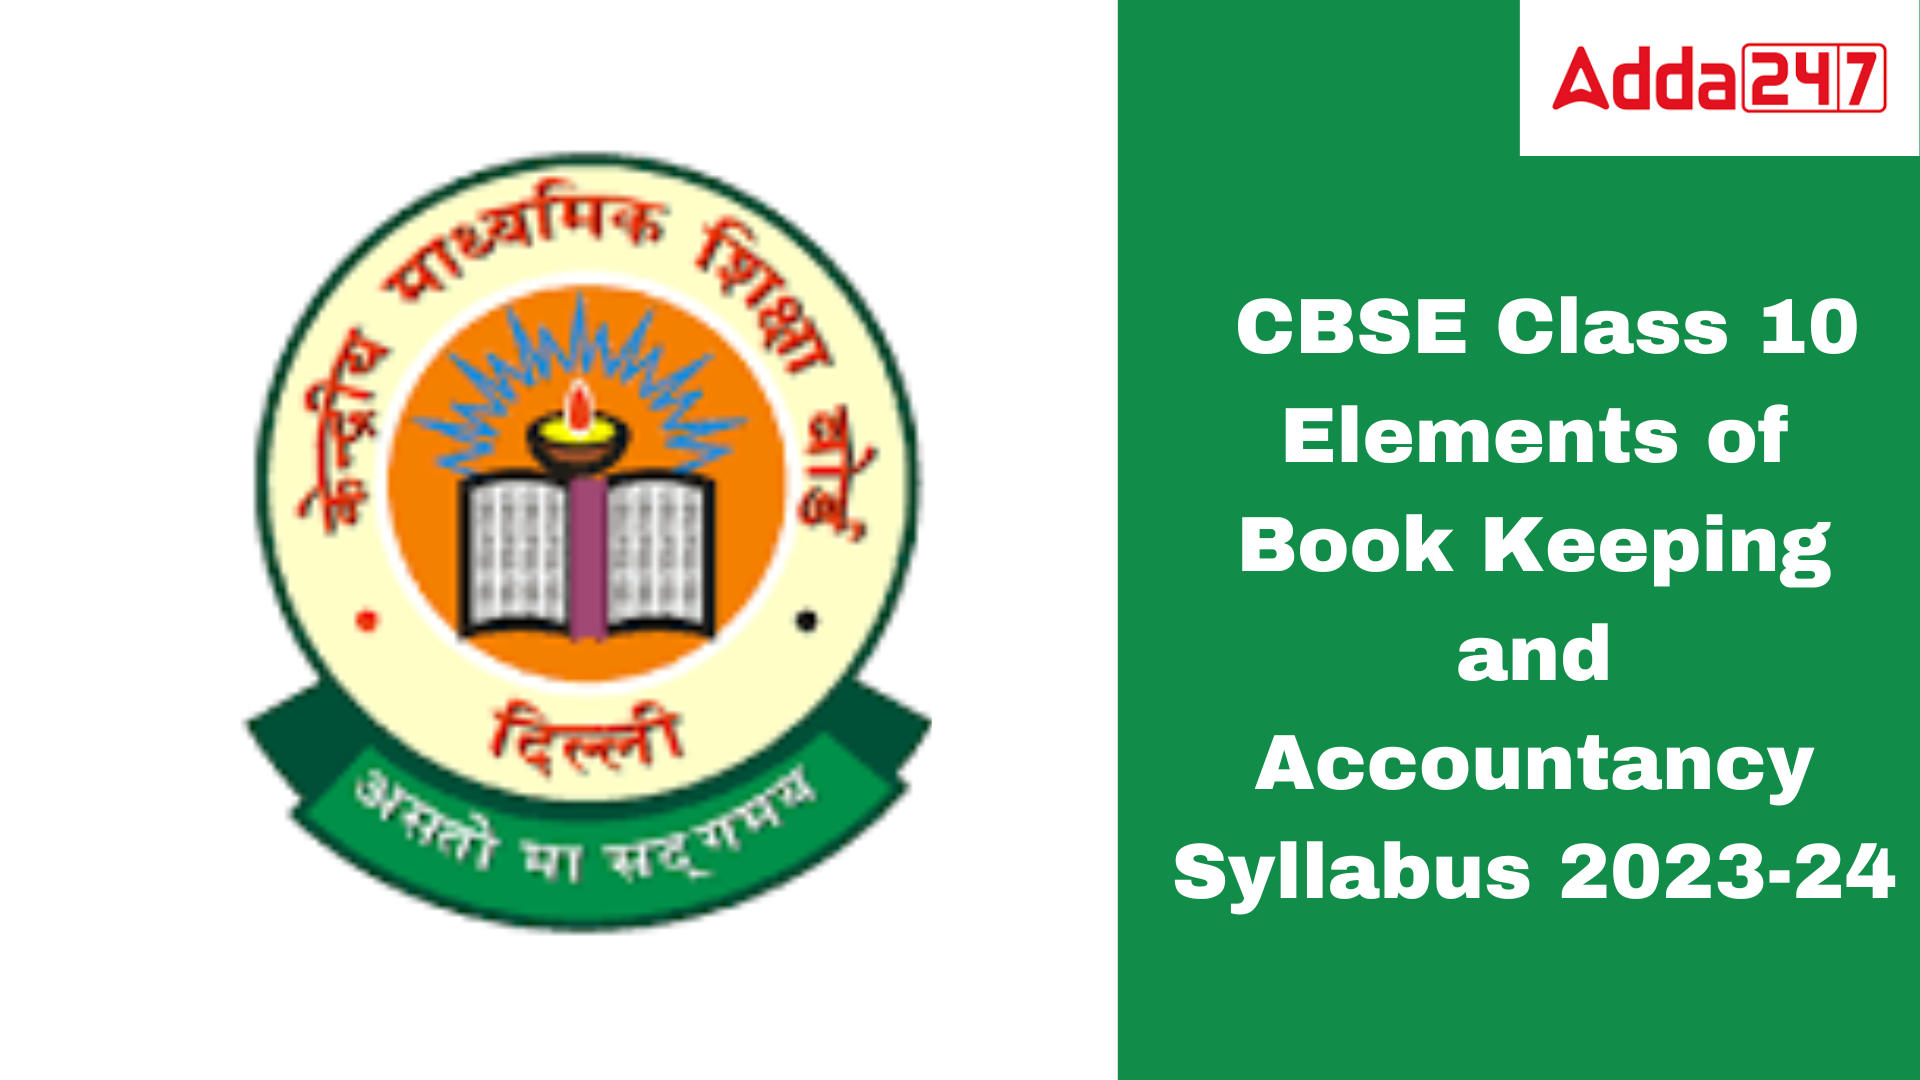 CBSE Class 10 Elements of Book Keeping and Accountancy Syllabus 2023-24